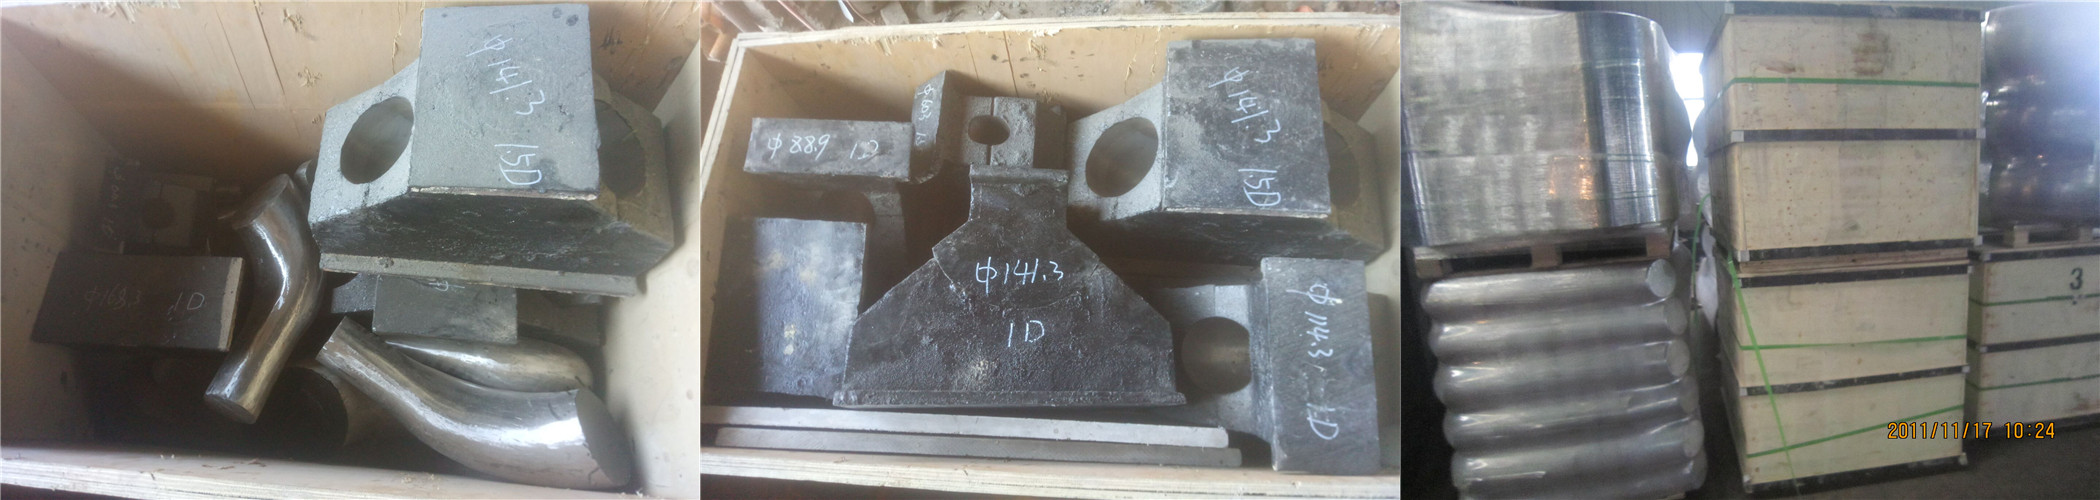 Pipe Fitting Mould Die Tee Produce Mould Tee Correction Mould packing